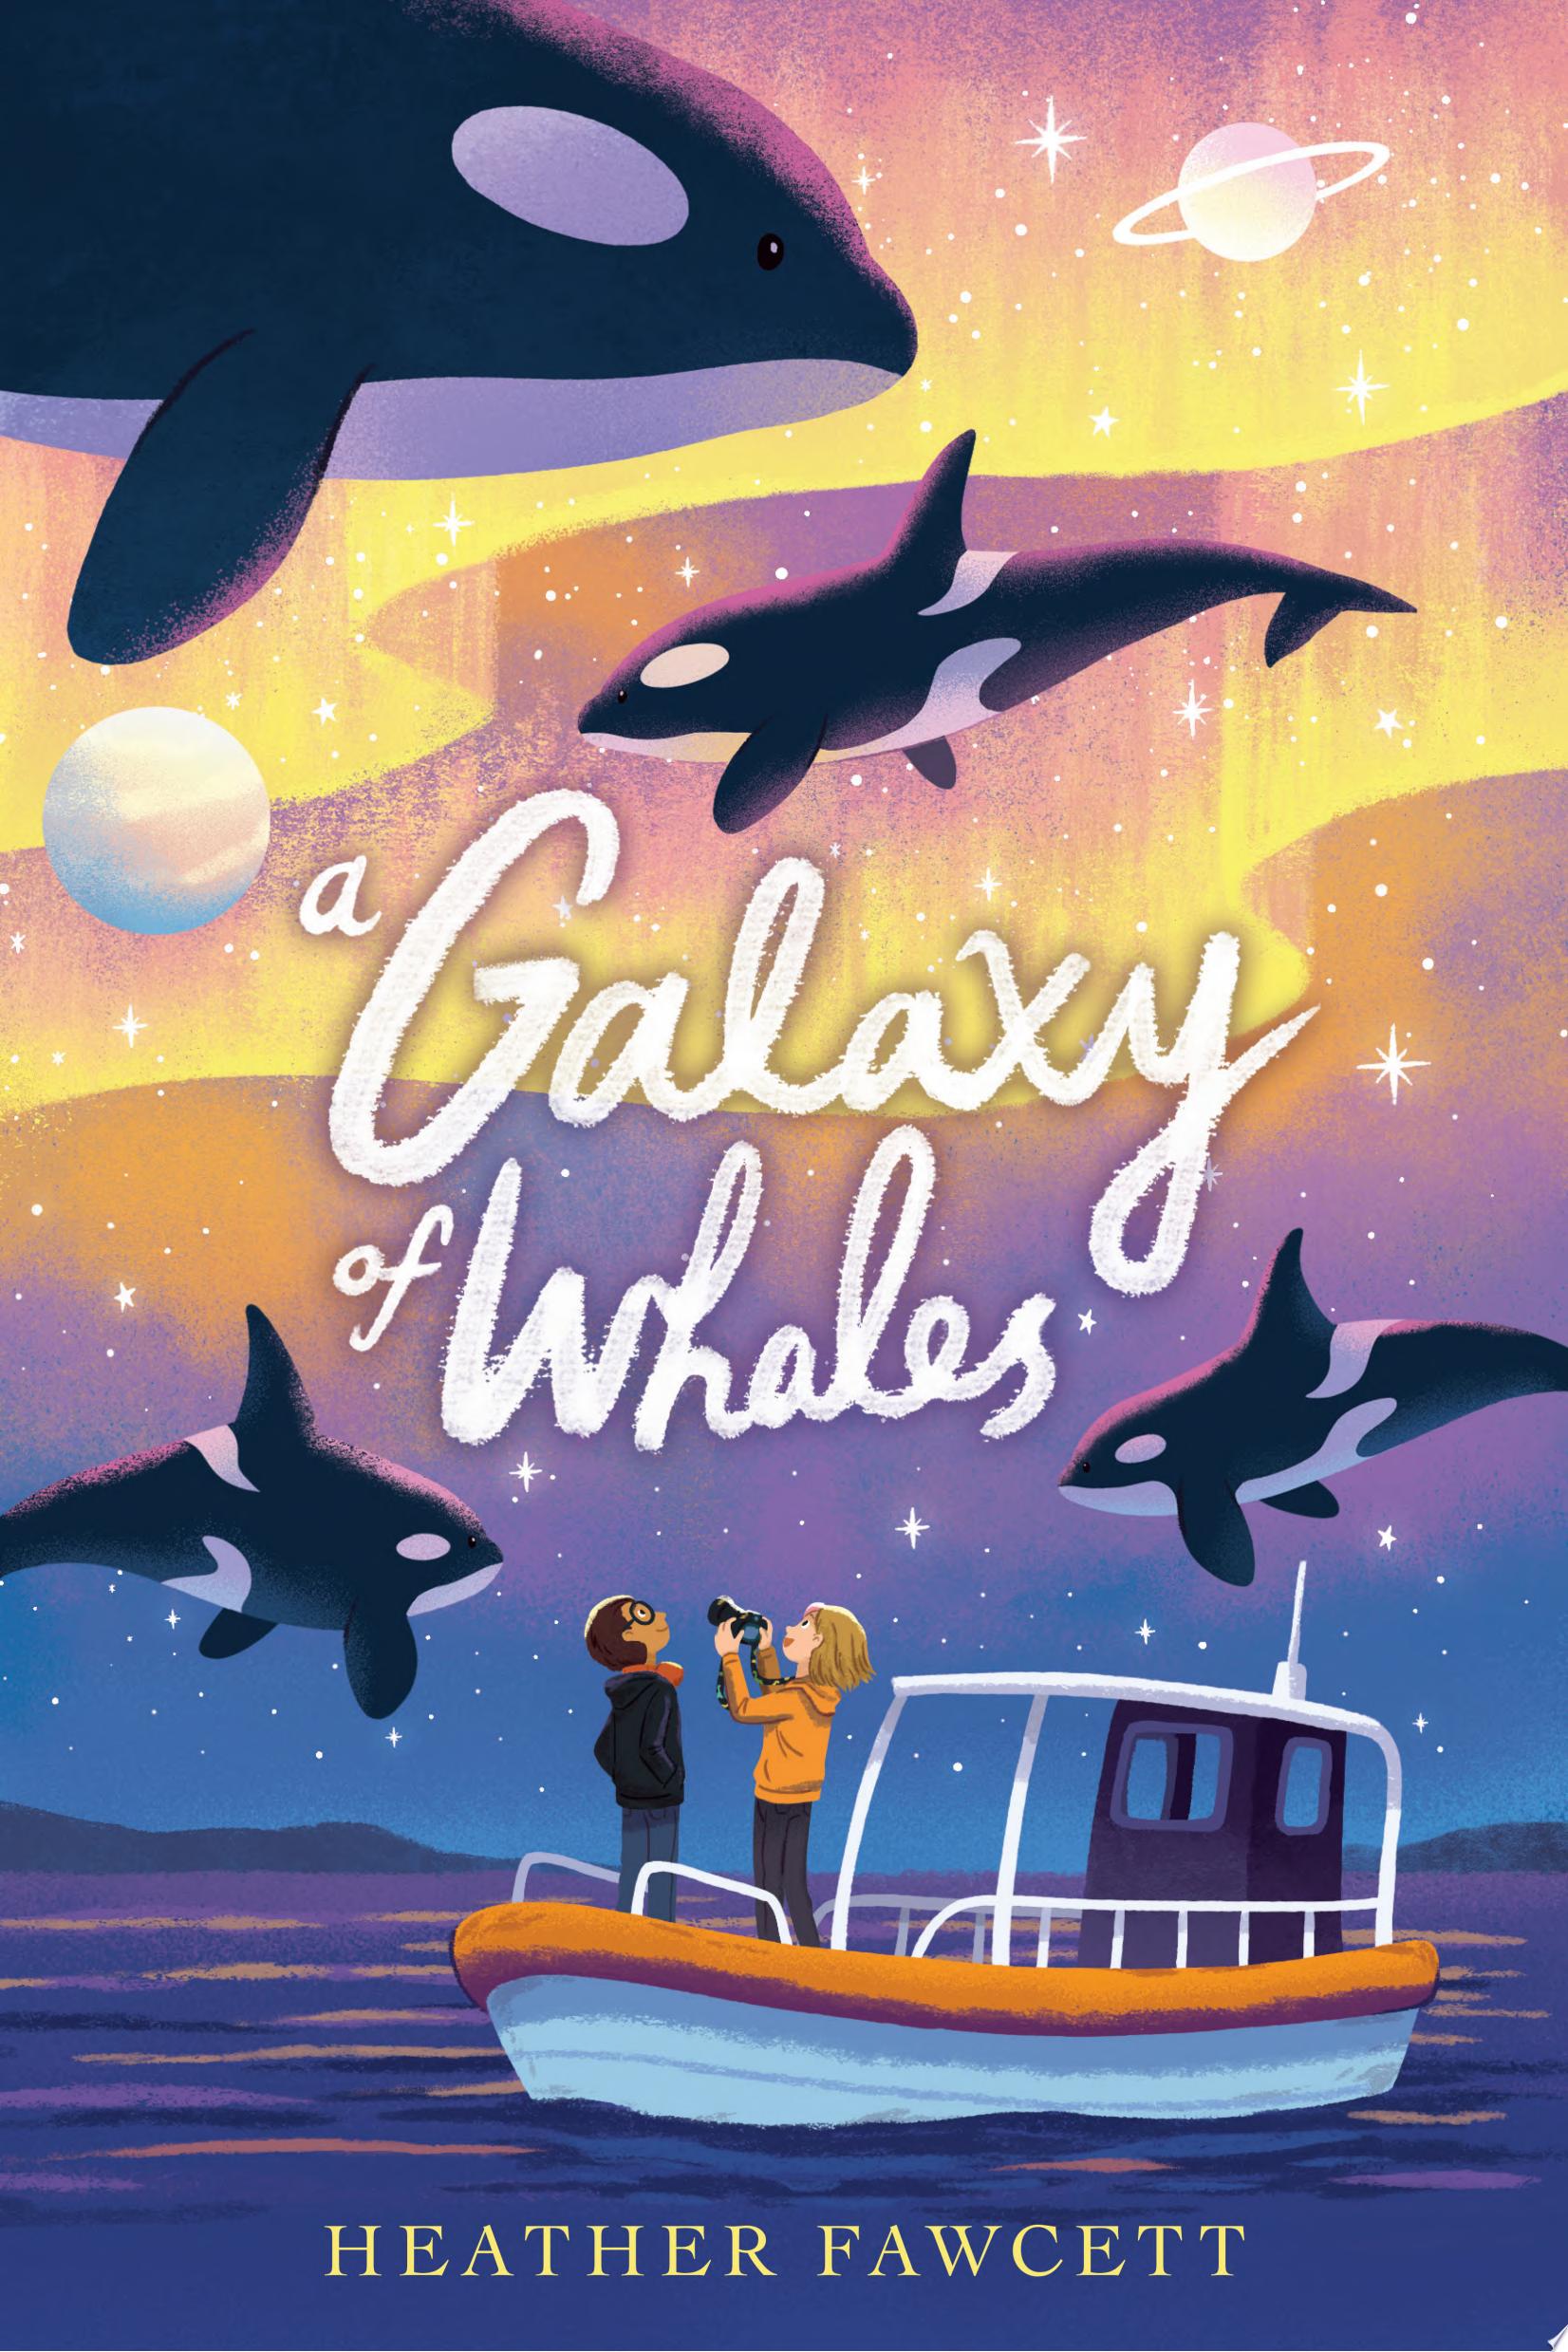 Image for "A Galaxy of Whales"